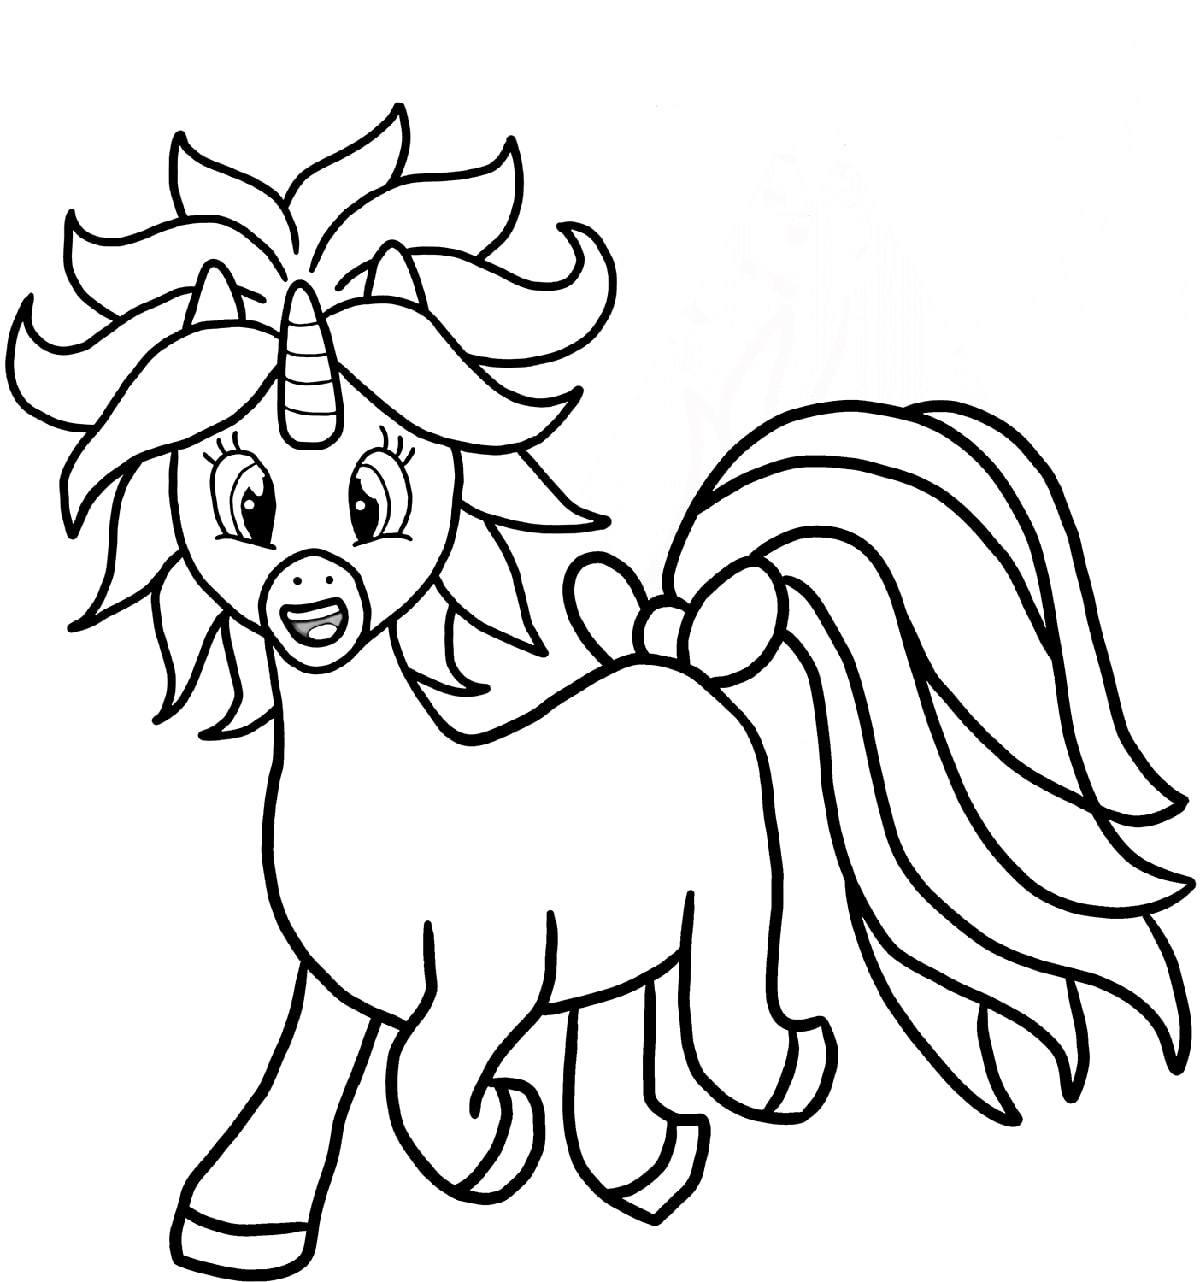 Lovely Baby Unicorn Coloring Page